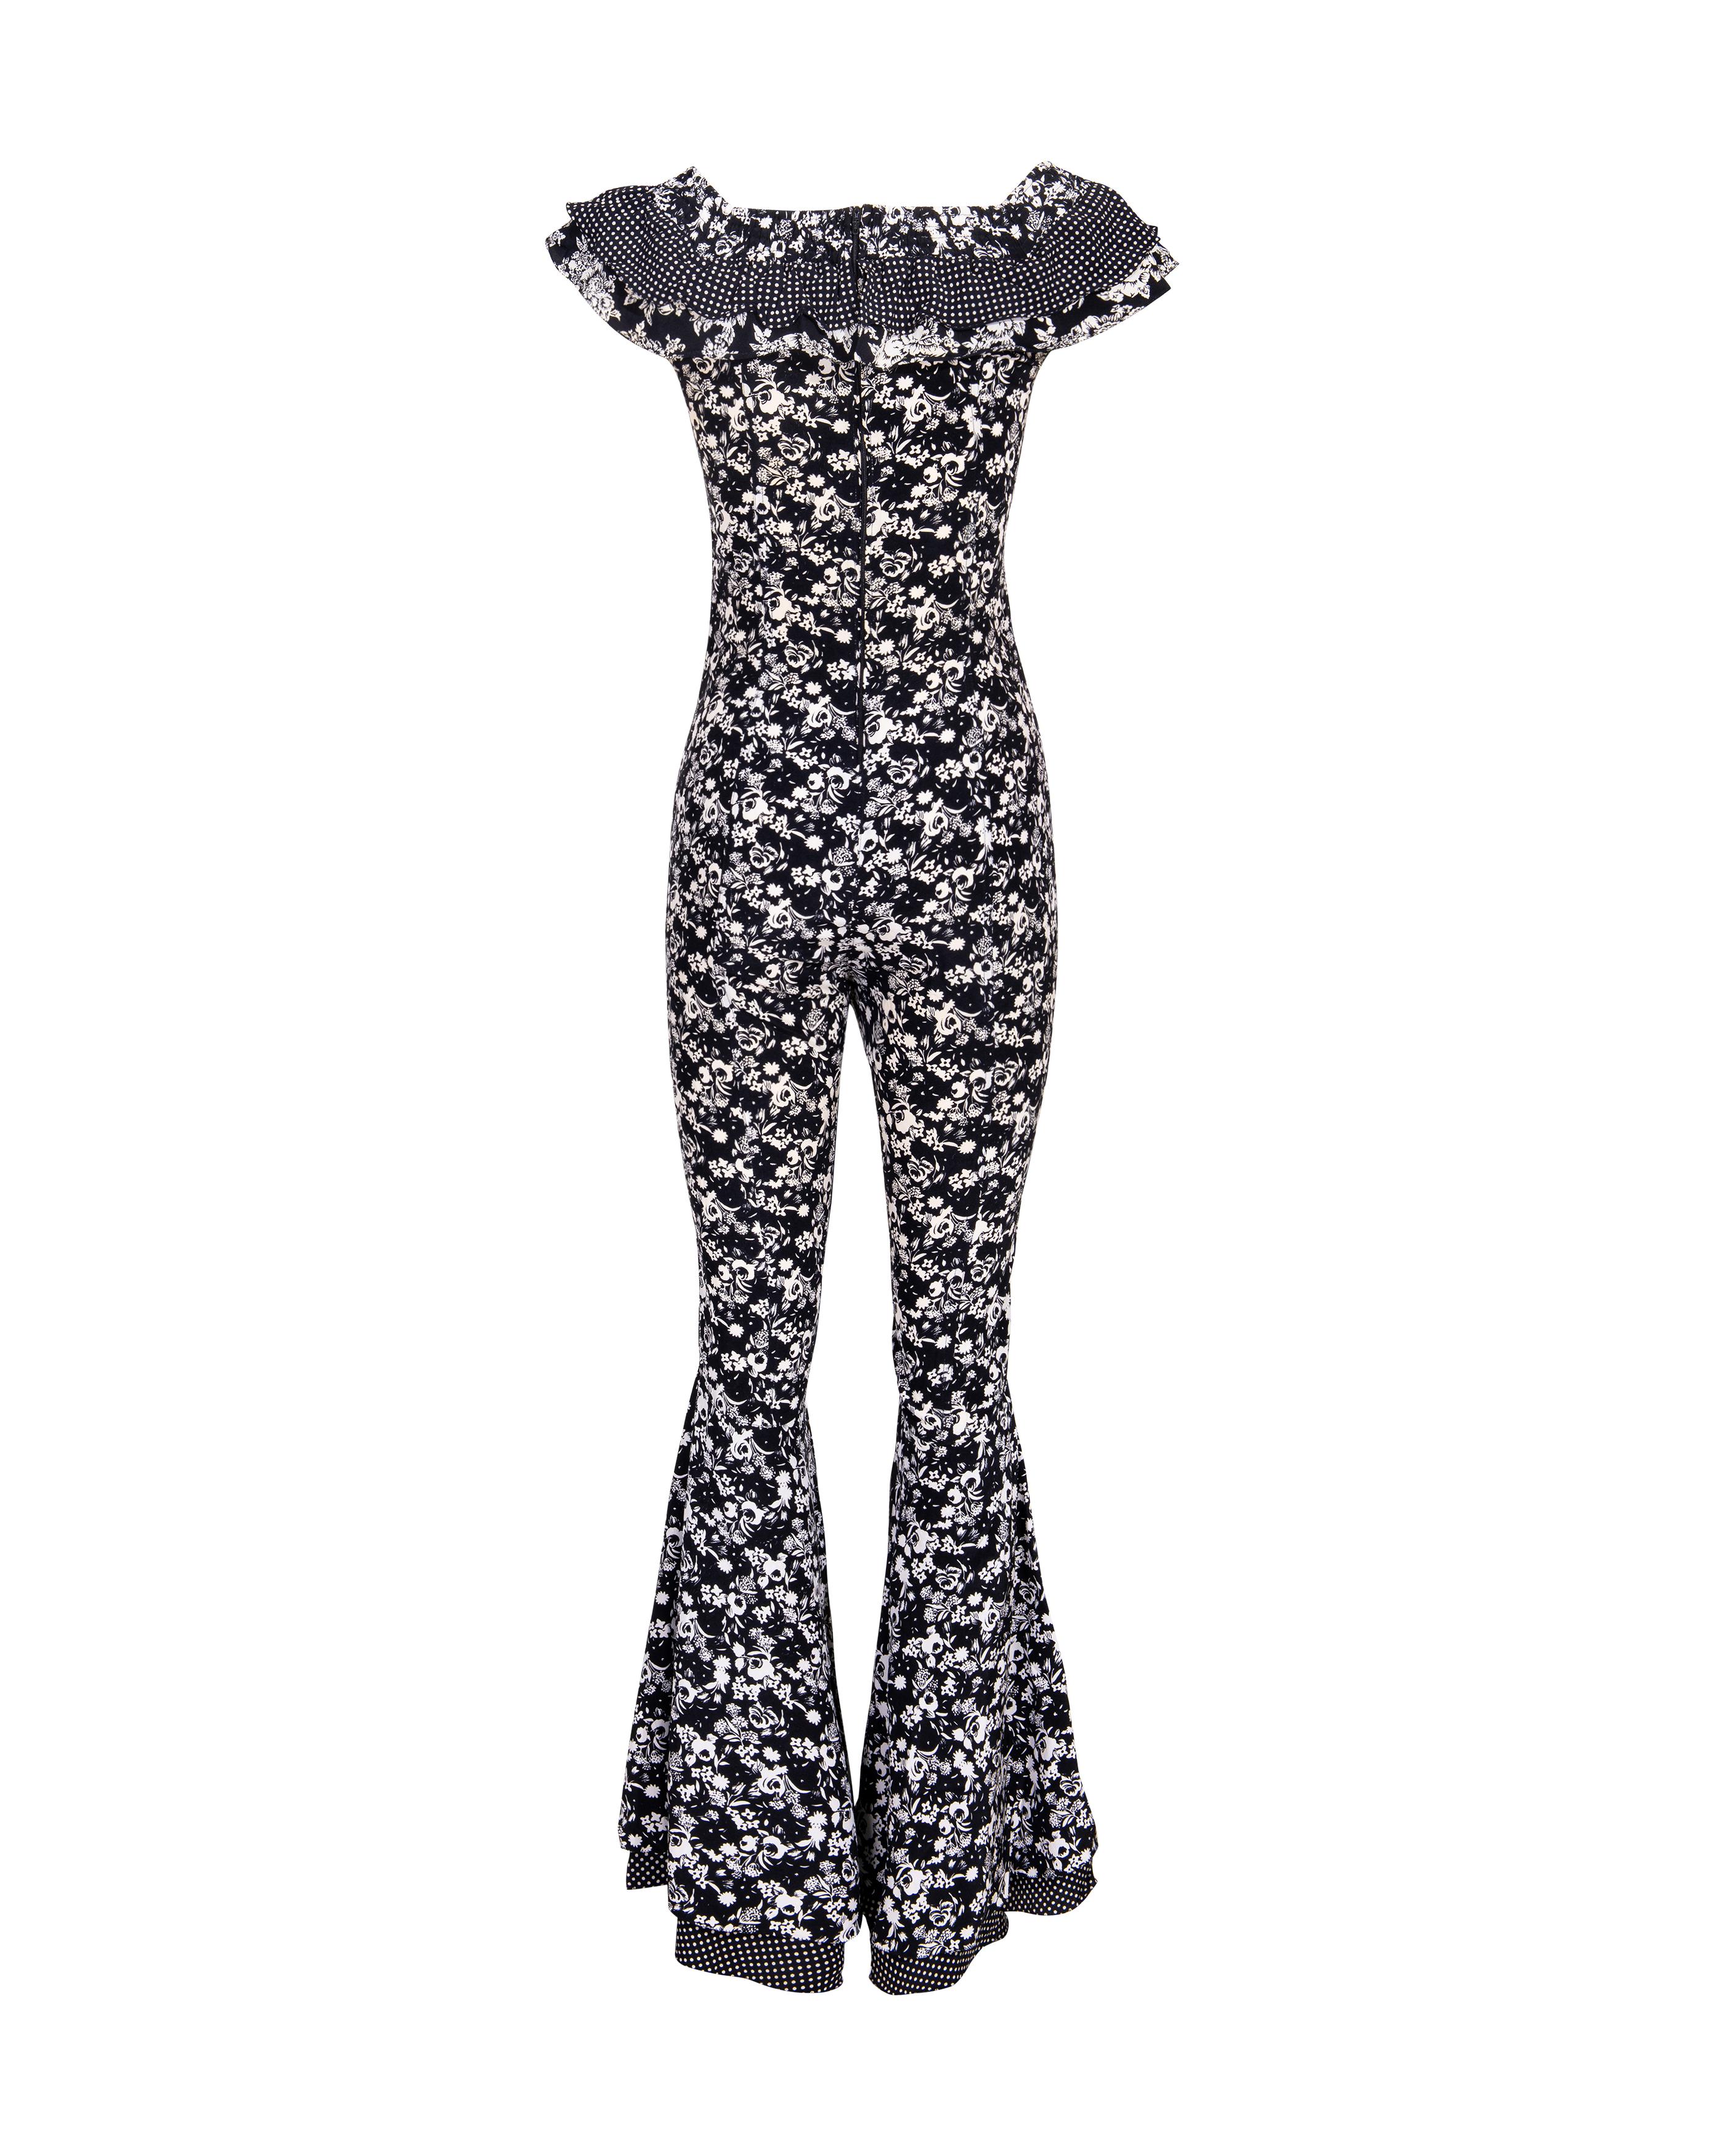 S/S 1993 Gianni Versace Floral and Polka Dot Pattern Bell-Bottom Jumpsuit For Sale 1